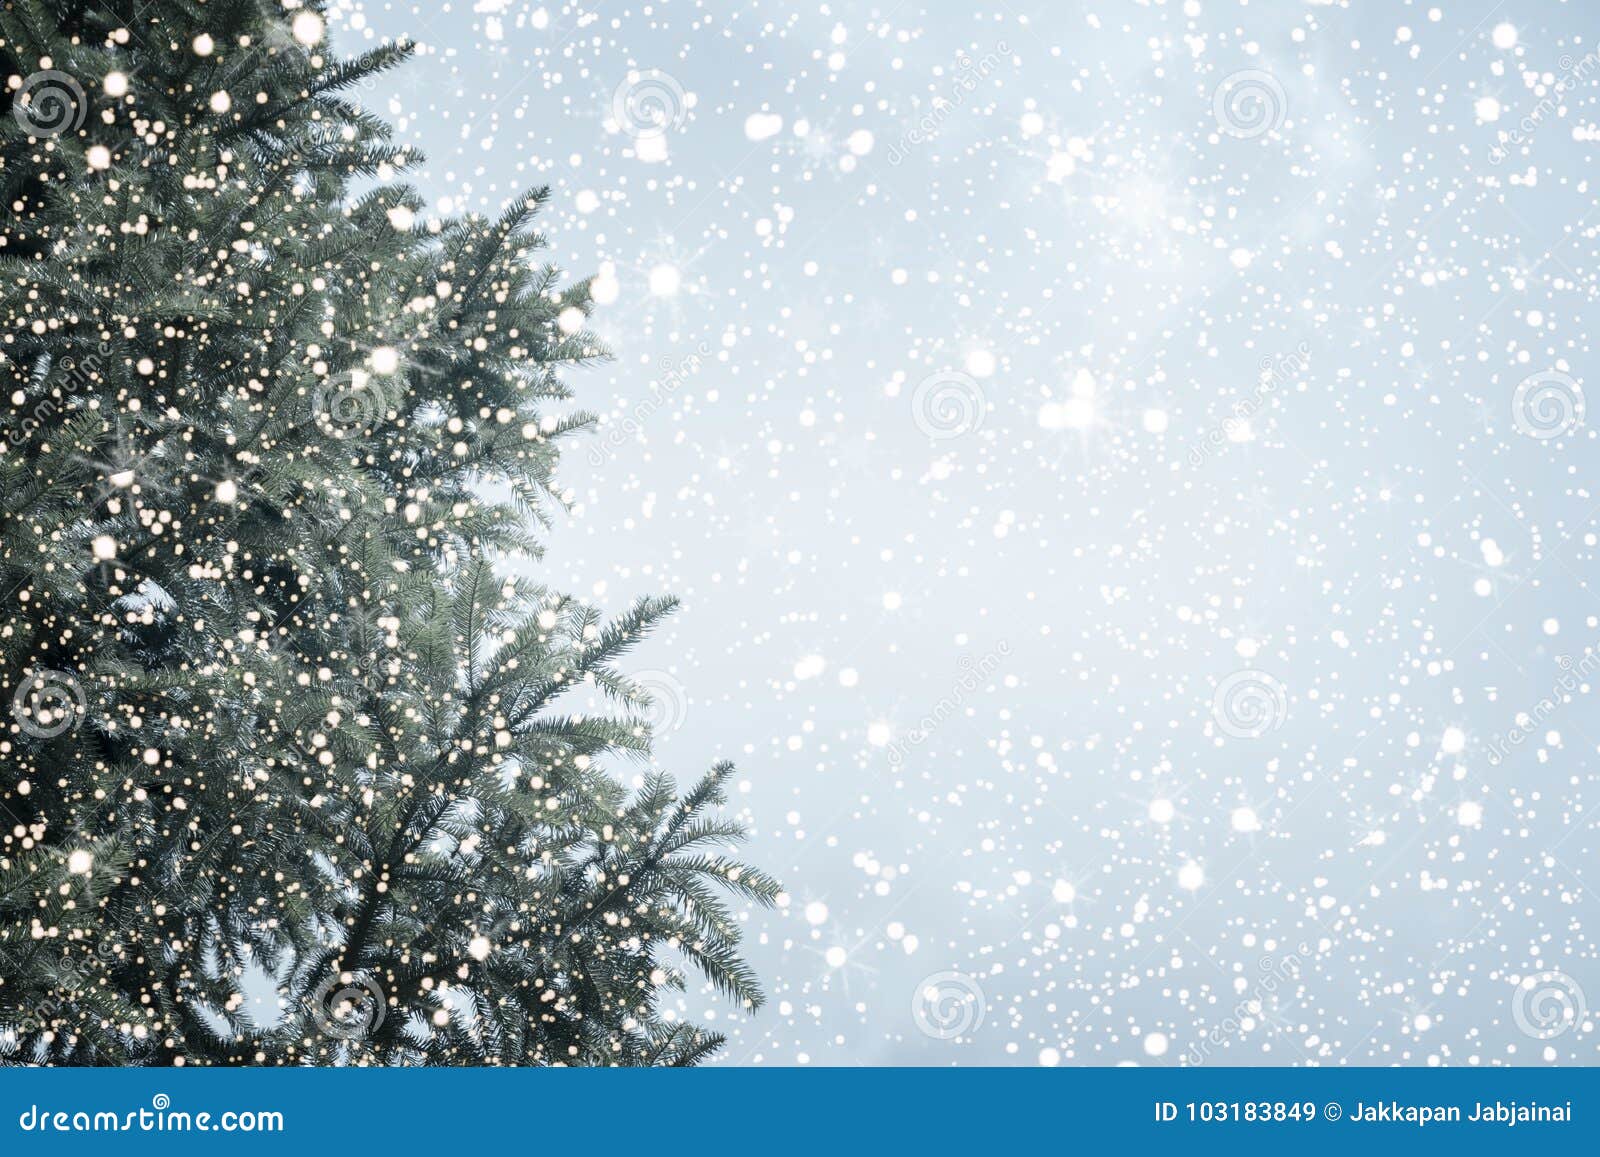 christmas tree pine or fir with snowfall on sky background in winter.